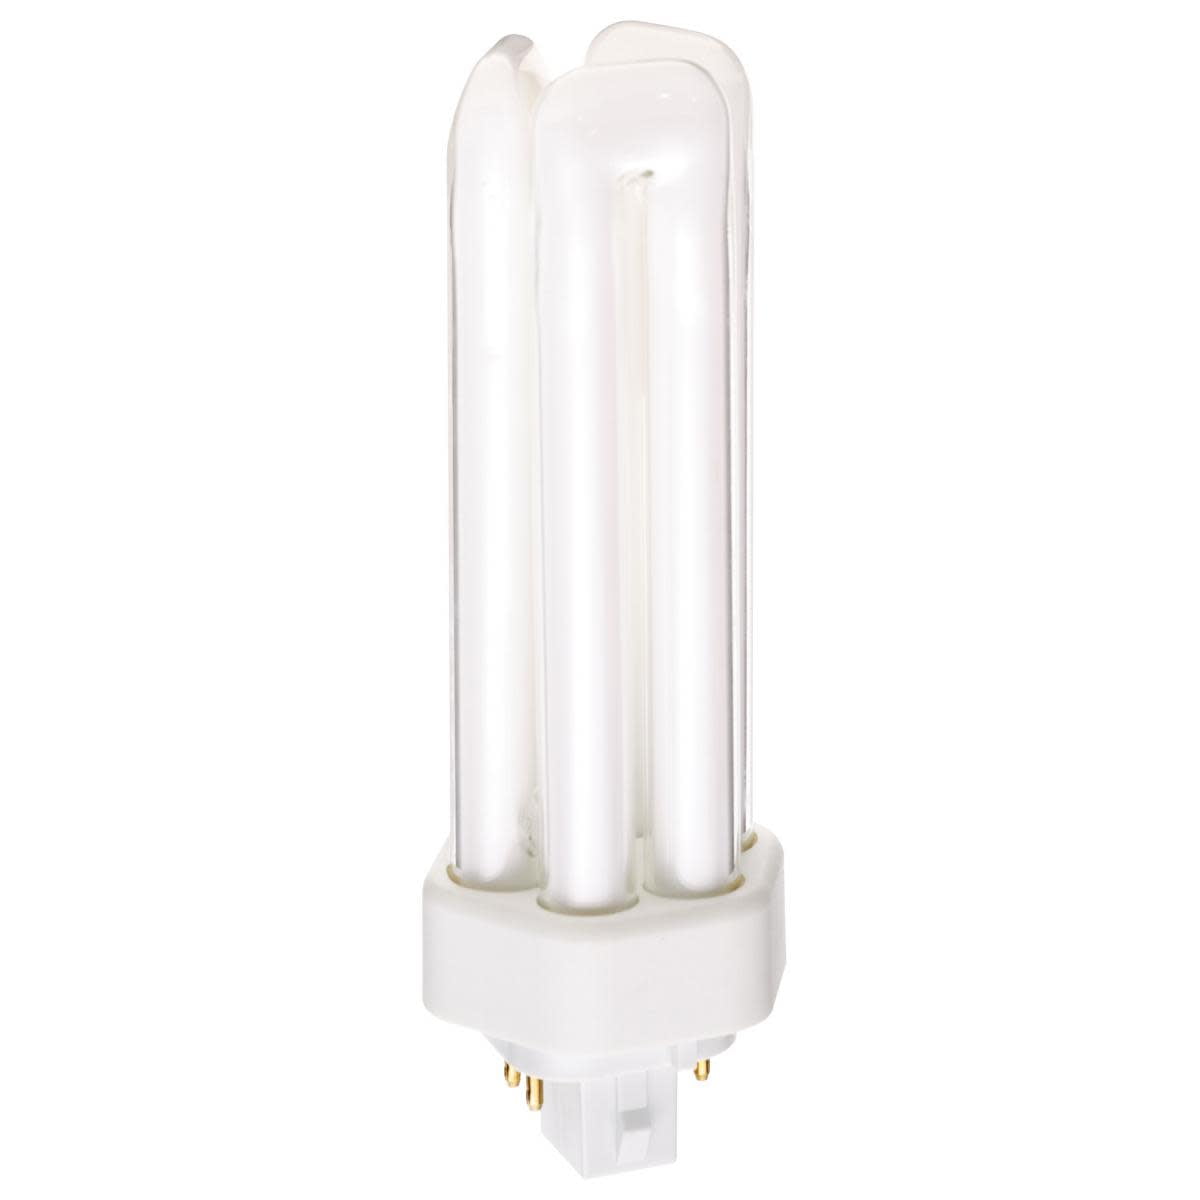 Philips Pl-t 42w 4 Pin High Performance Compact Flourescent Bult for sale online 